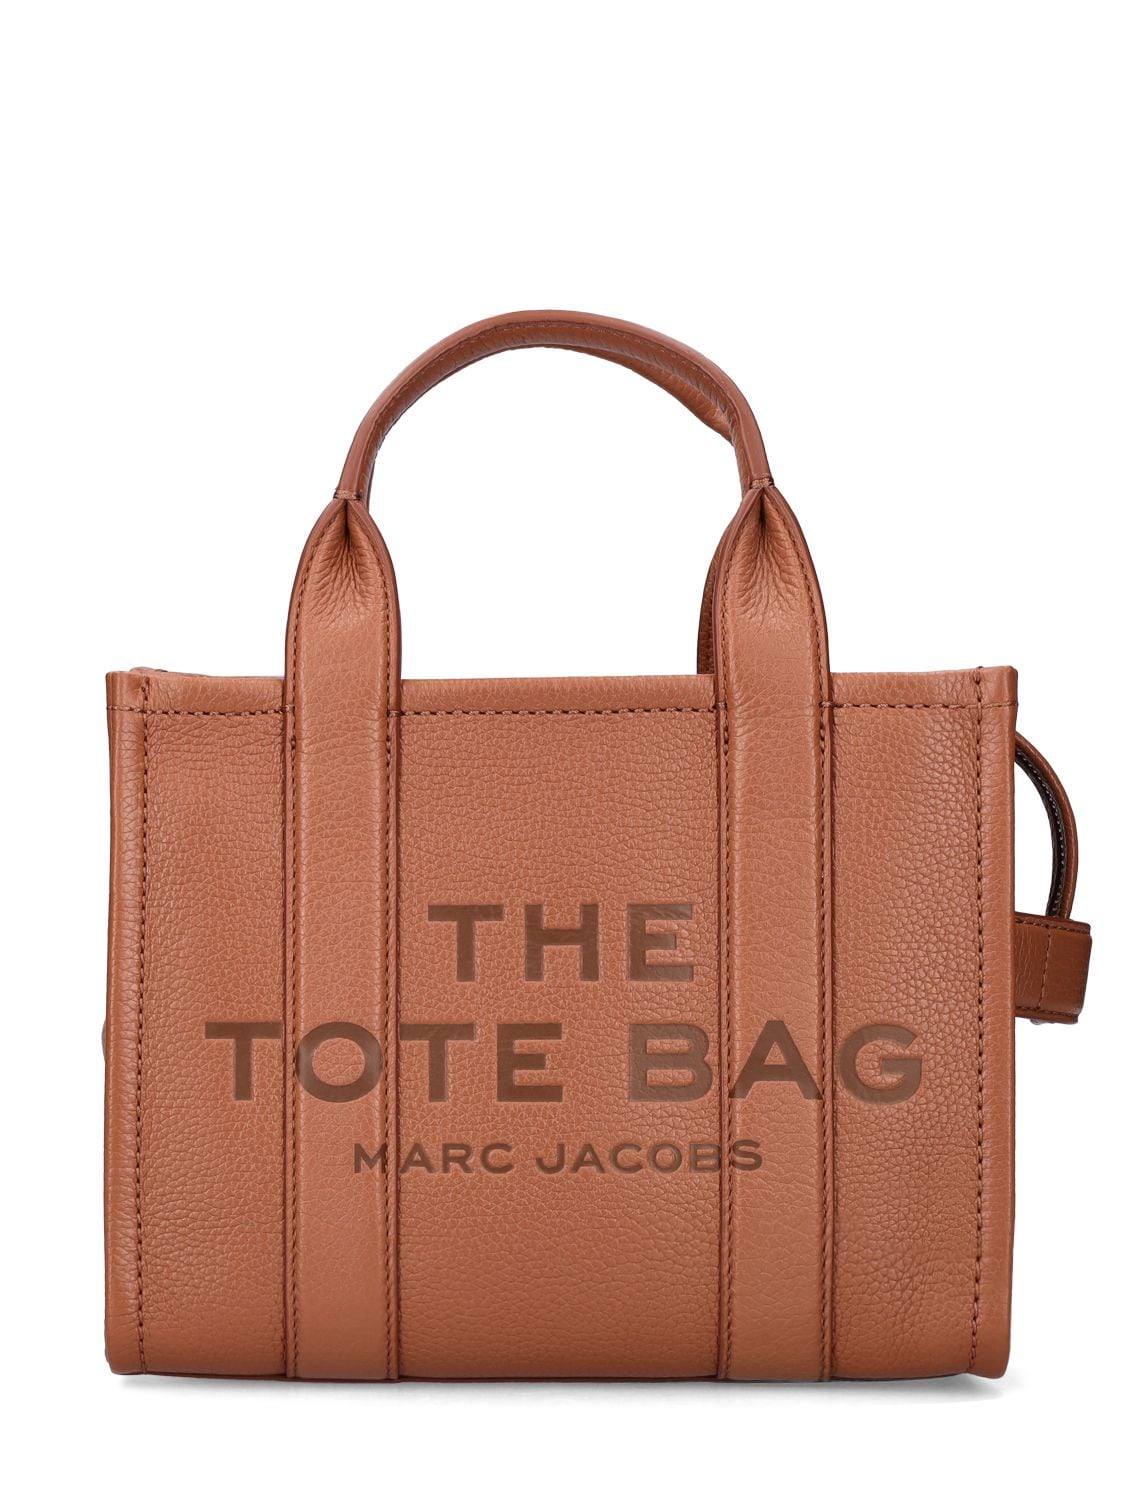 MARC JACOBS The Small Tote Leather Bag